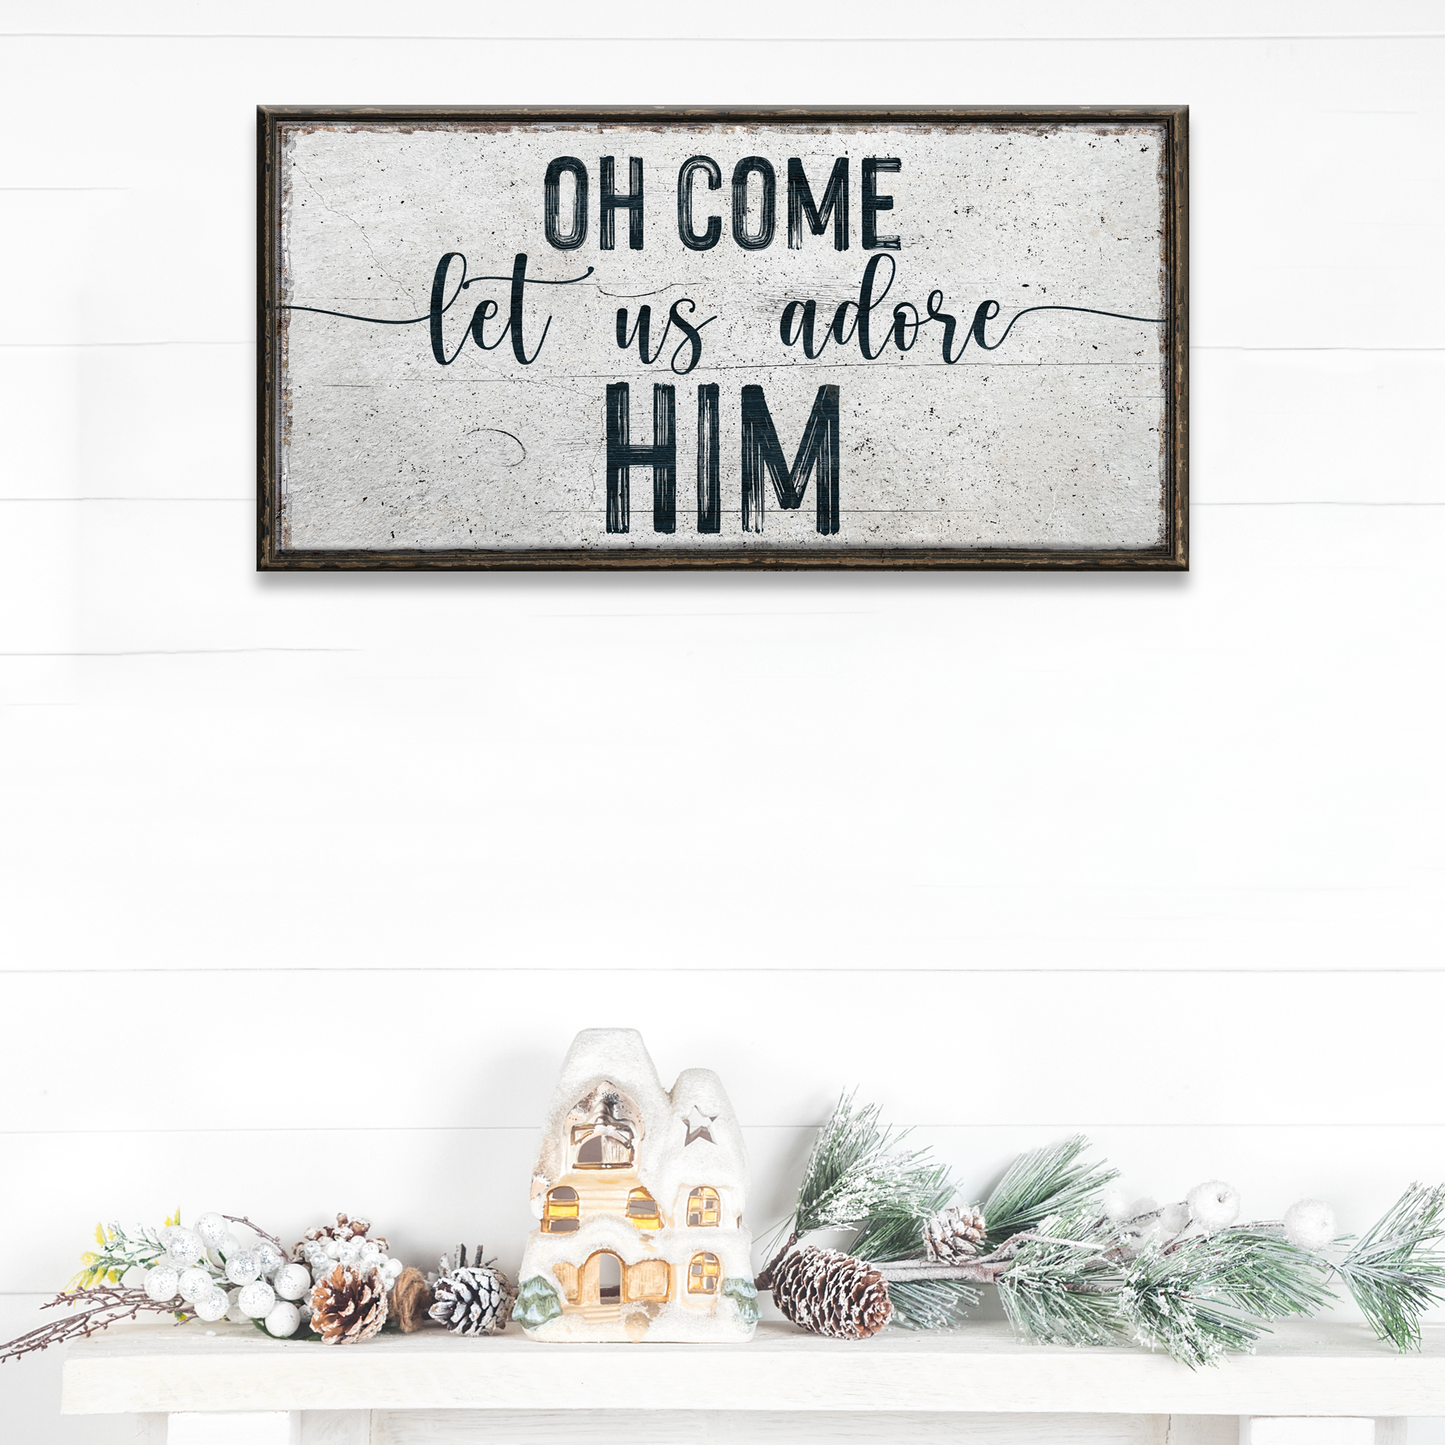 Let Us Adore Him Sign - Image by Tailored Canvases